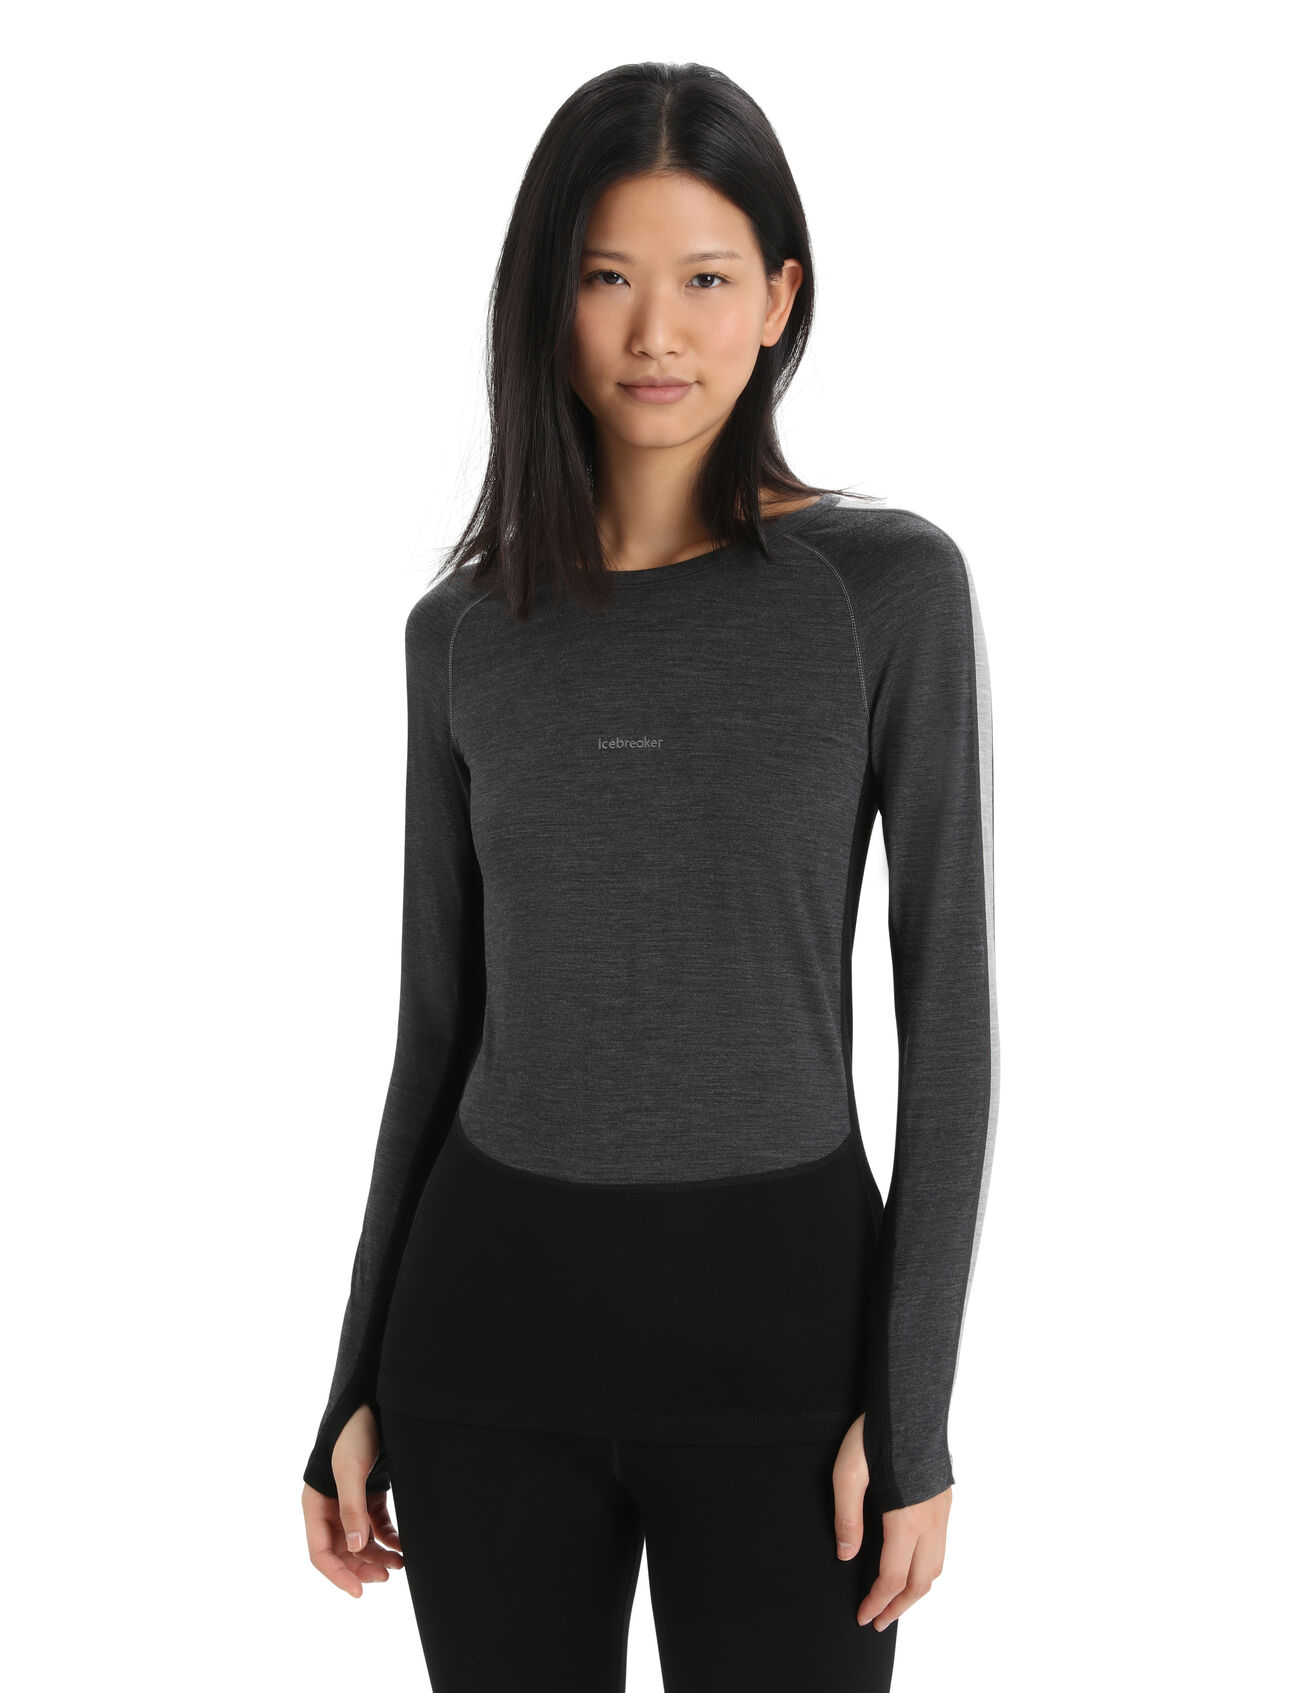 Womens 200 ZoneKnit™ Merino Long Sleeve Crewe Thermal Top A midweight merino base layer top designed to help regulate temperature during high-intensity activity, the 200 ZoneKnit™ Long Sleeve Crewe features 100% pure and natural merino wool.